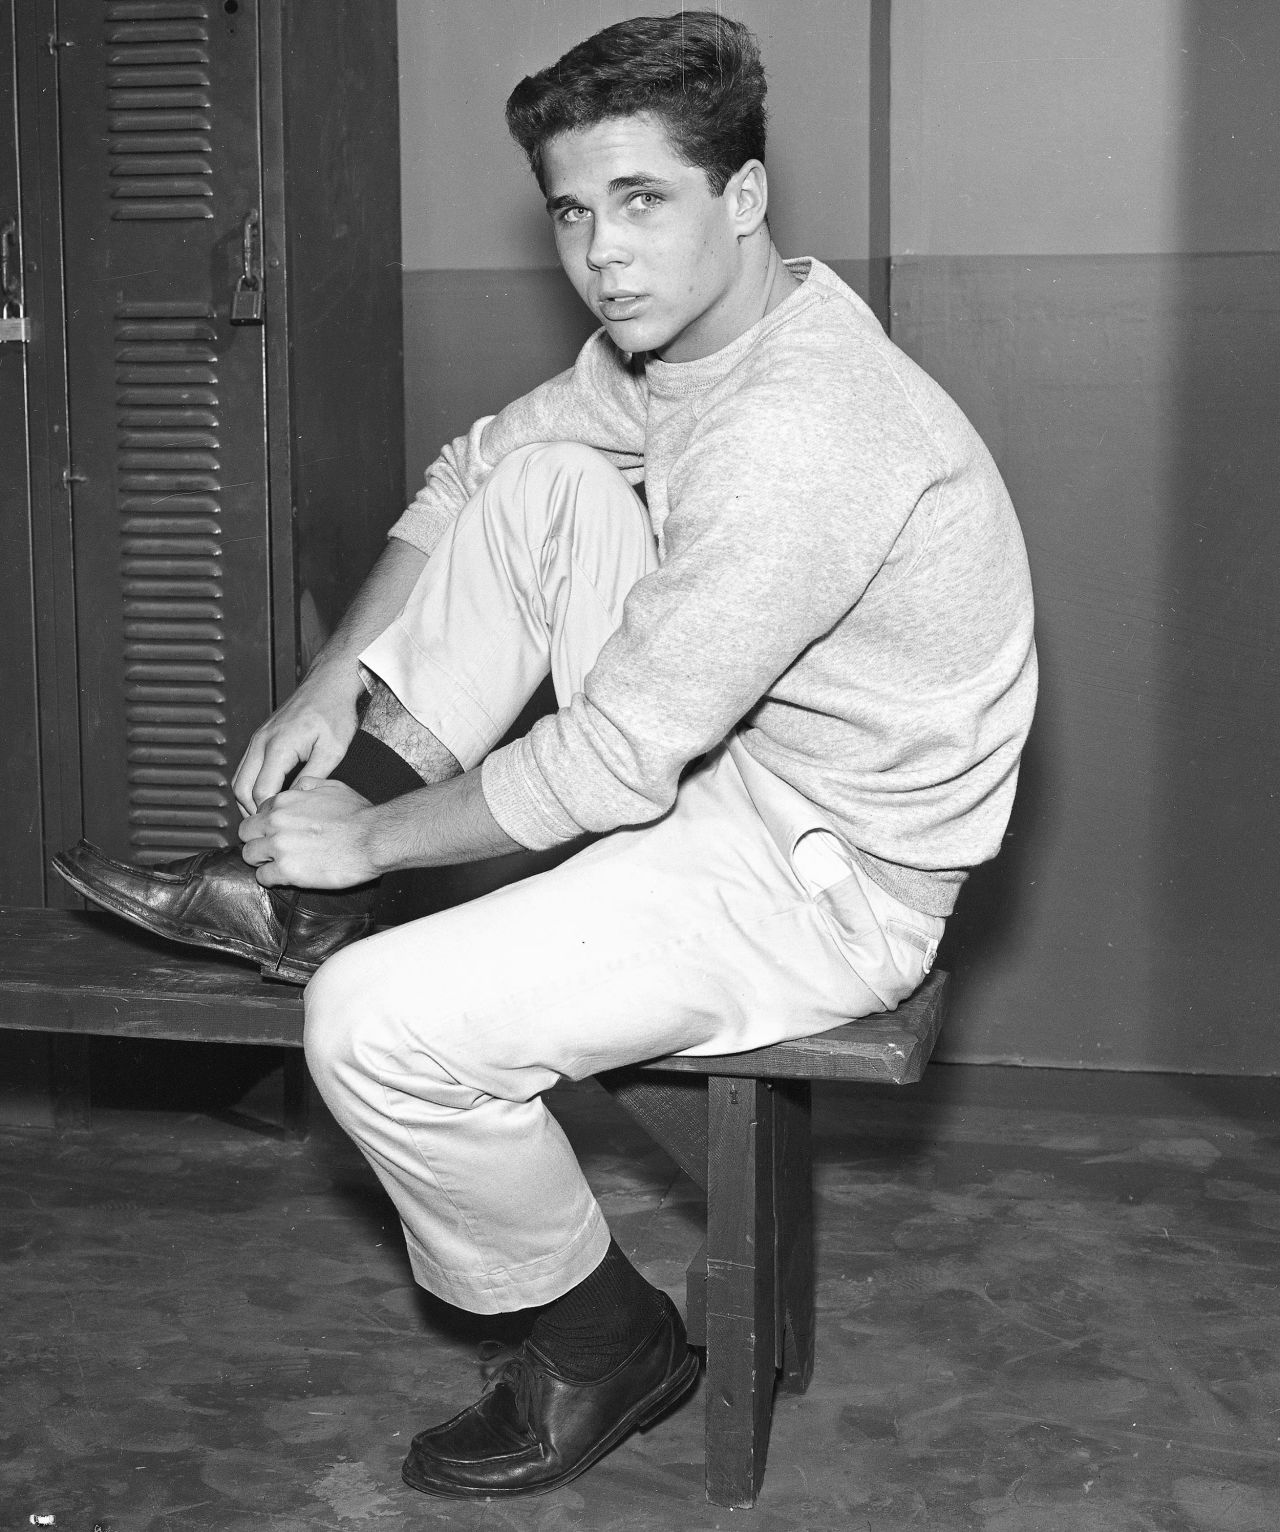 <a href="https://www.cnn.com/2022/07/27/entertainment/tony-dow-obit/index.html" target="_blank">Tony Dow,</a> an actor and director best known for portraying Wally Cleaver on the sitcom "Leave It to Beaver," died on July 27, according to his manager Frank Bilotta, citing Dow's son Christopher. Dow was 77.